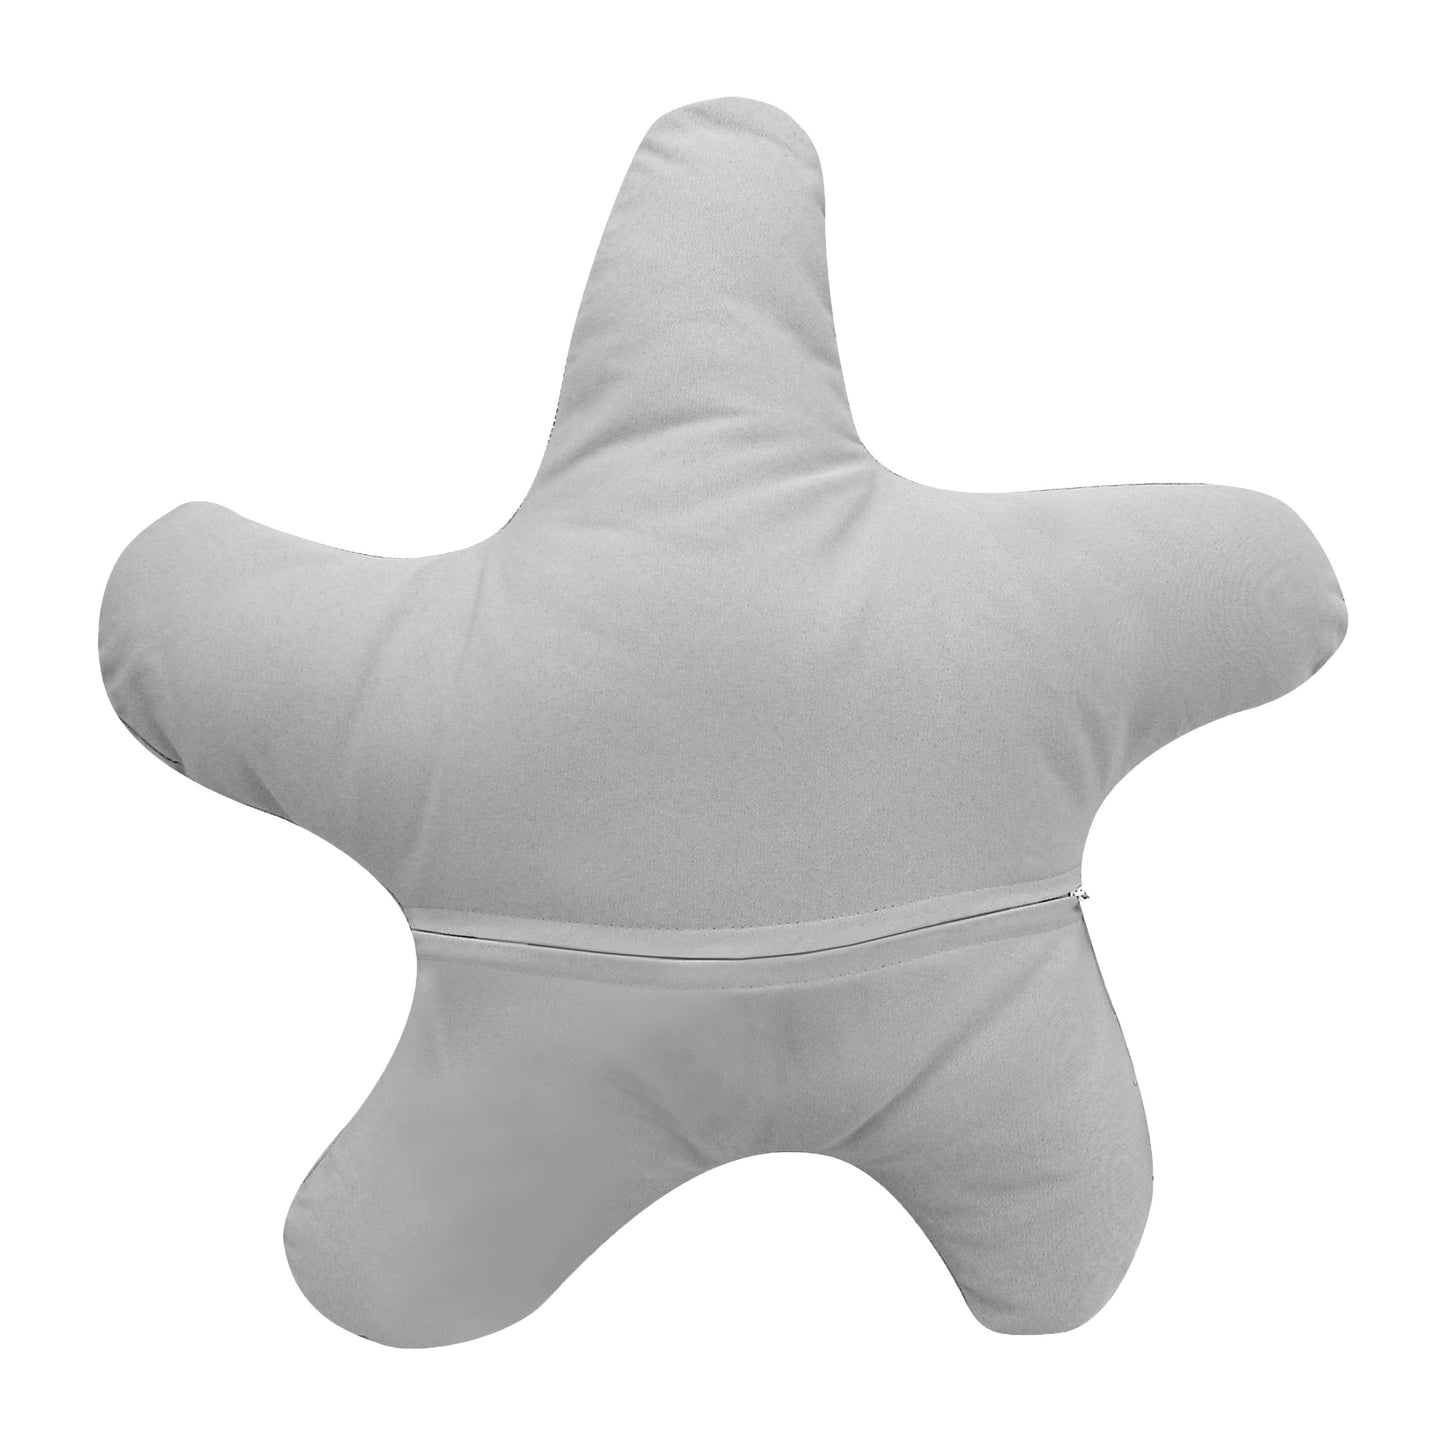 Solid silver fabric; back of the Silver Shaped Sea Star pillow with zipper enclosure.